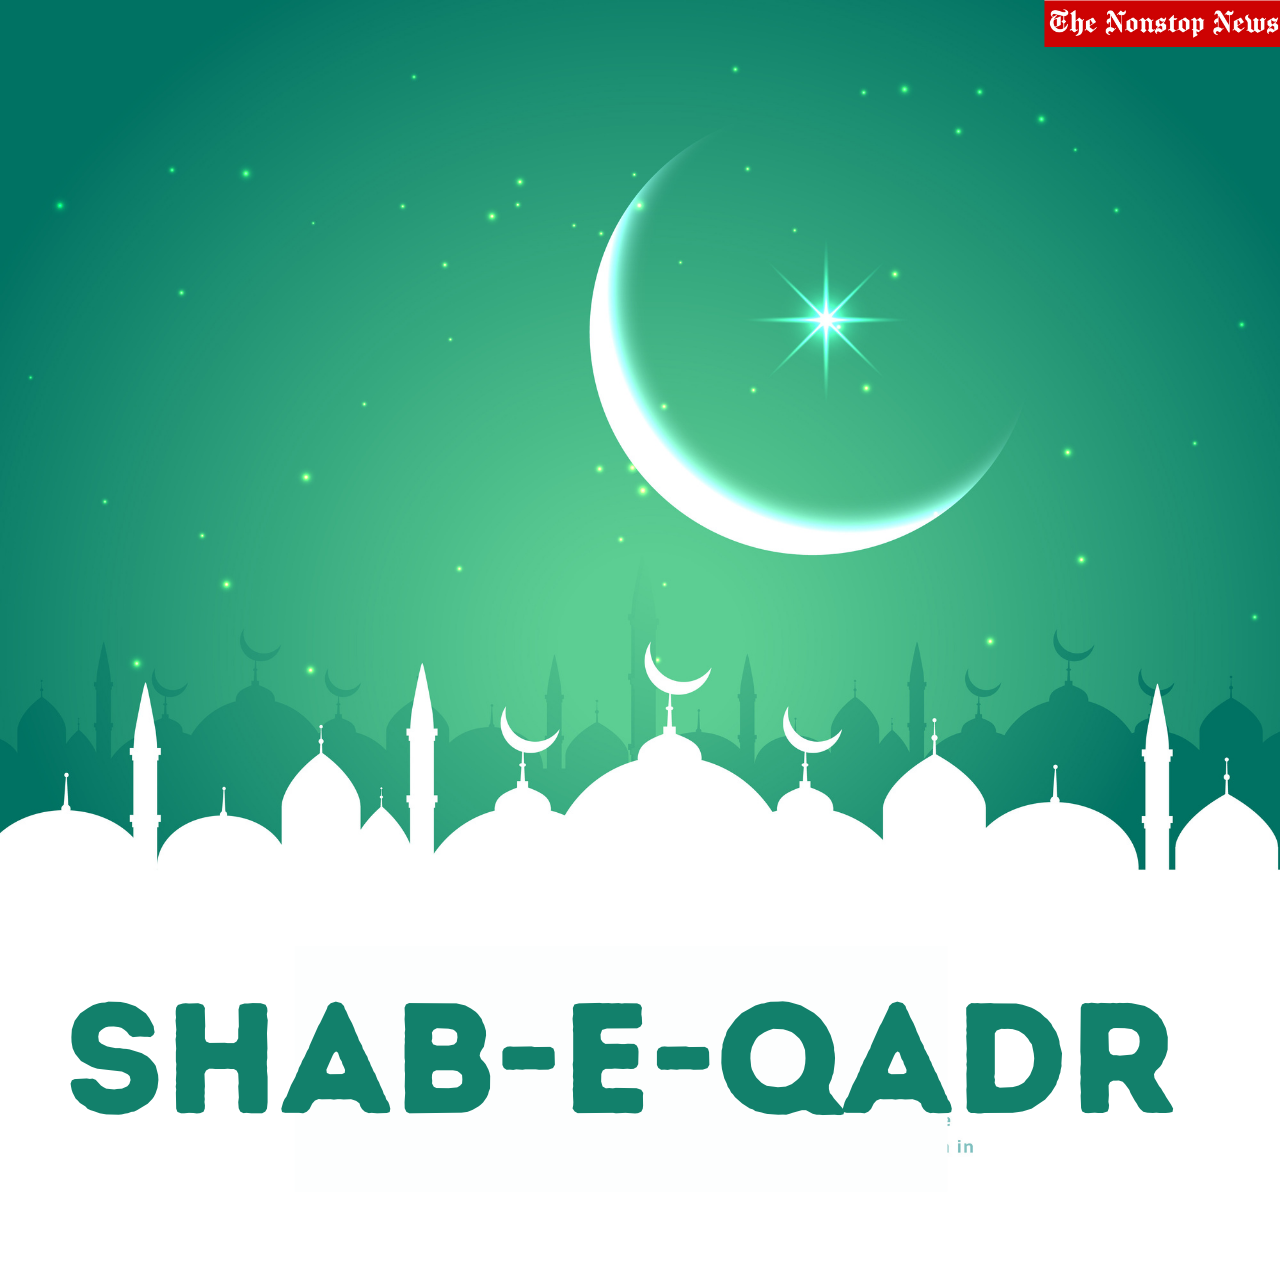 Shab-e-Qadr 2022: Best Quotes, Wishes, Greetings, Messages, Dua, HD Images, Posters To Share